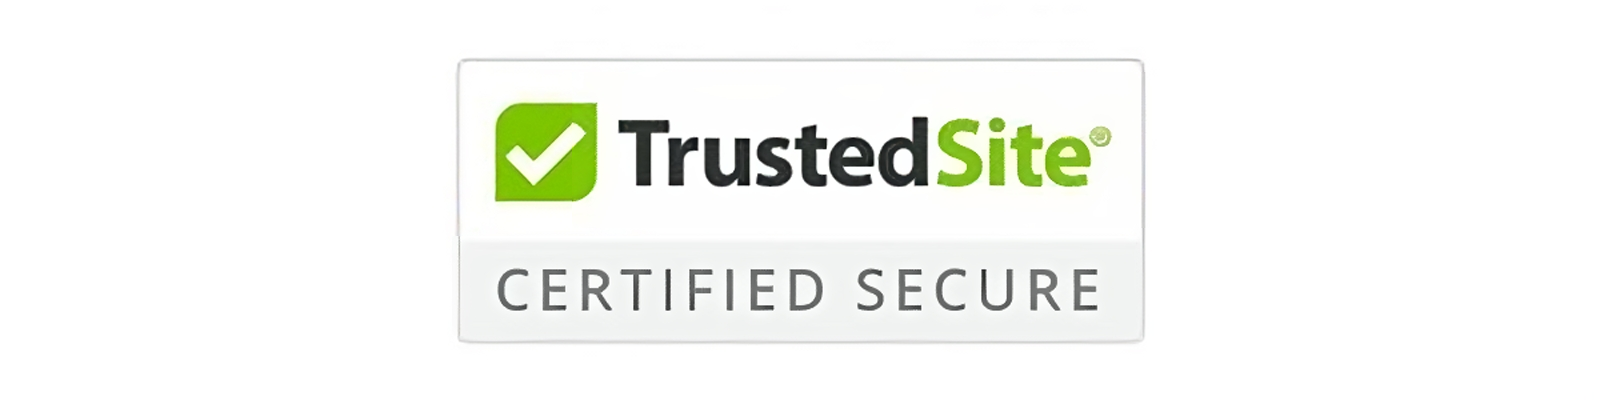 Certified as a Trusted Site